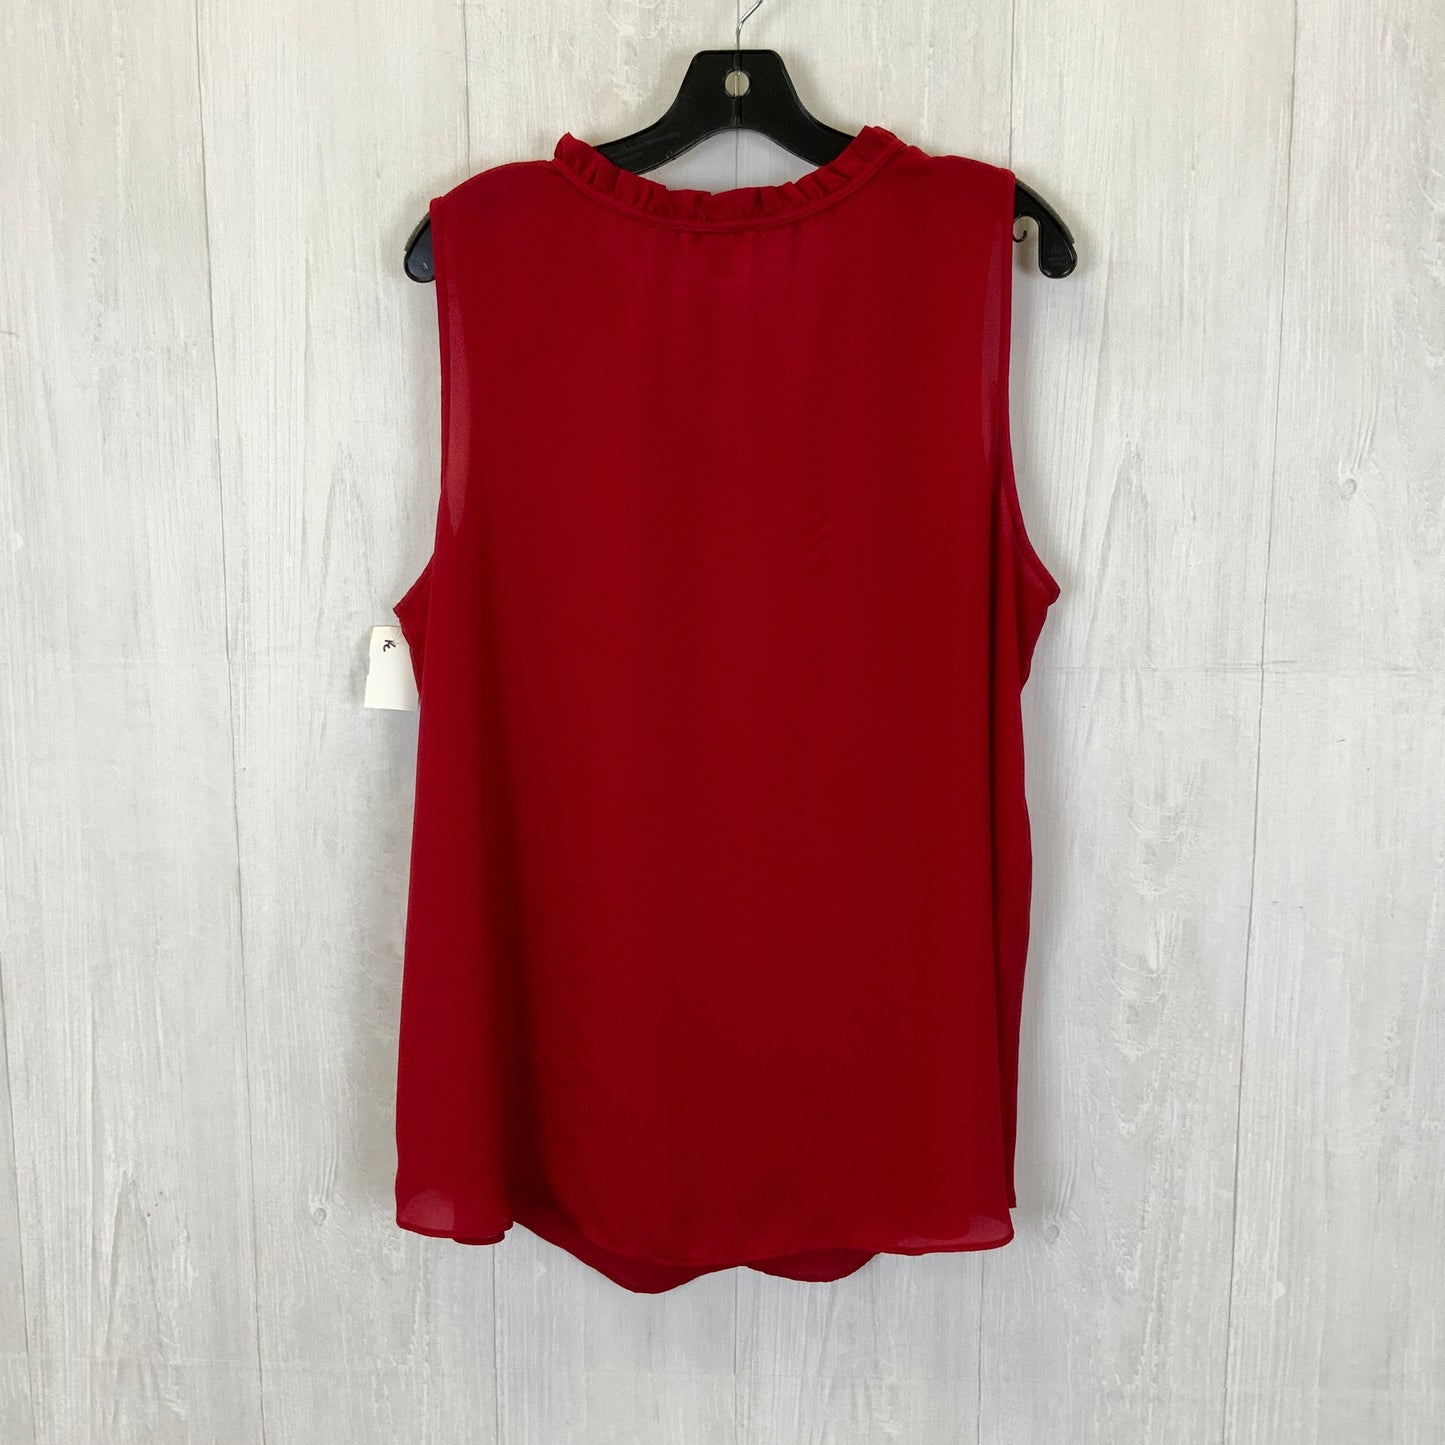 Red Top Sleeveless Cato, Size 2x